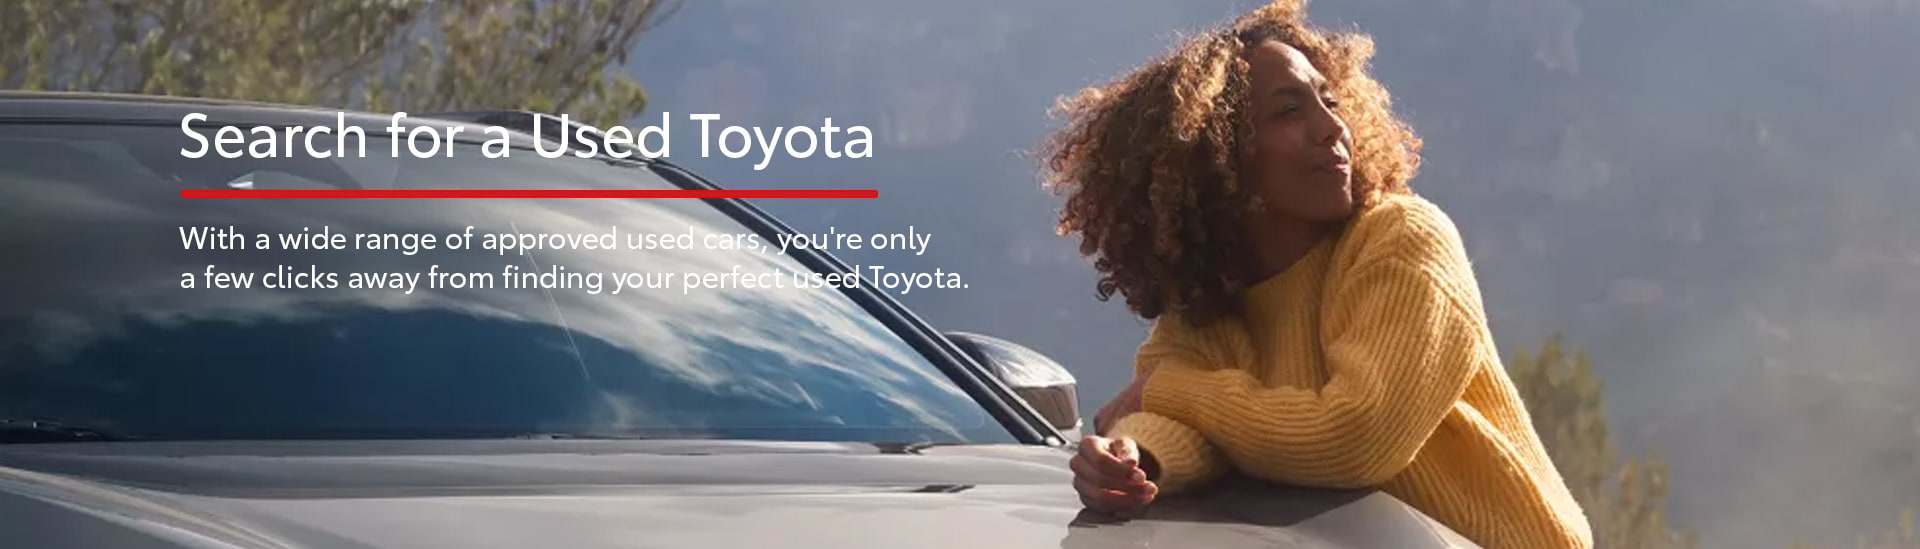 Toyota Used Car Search